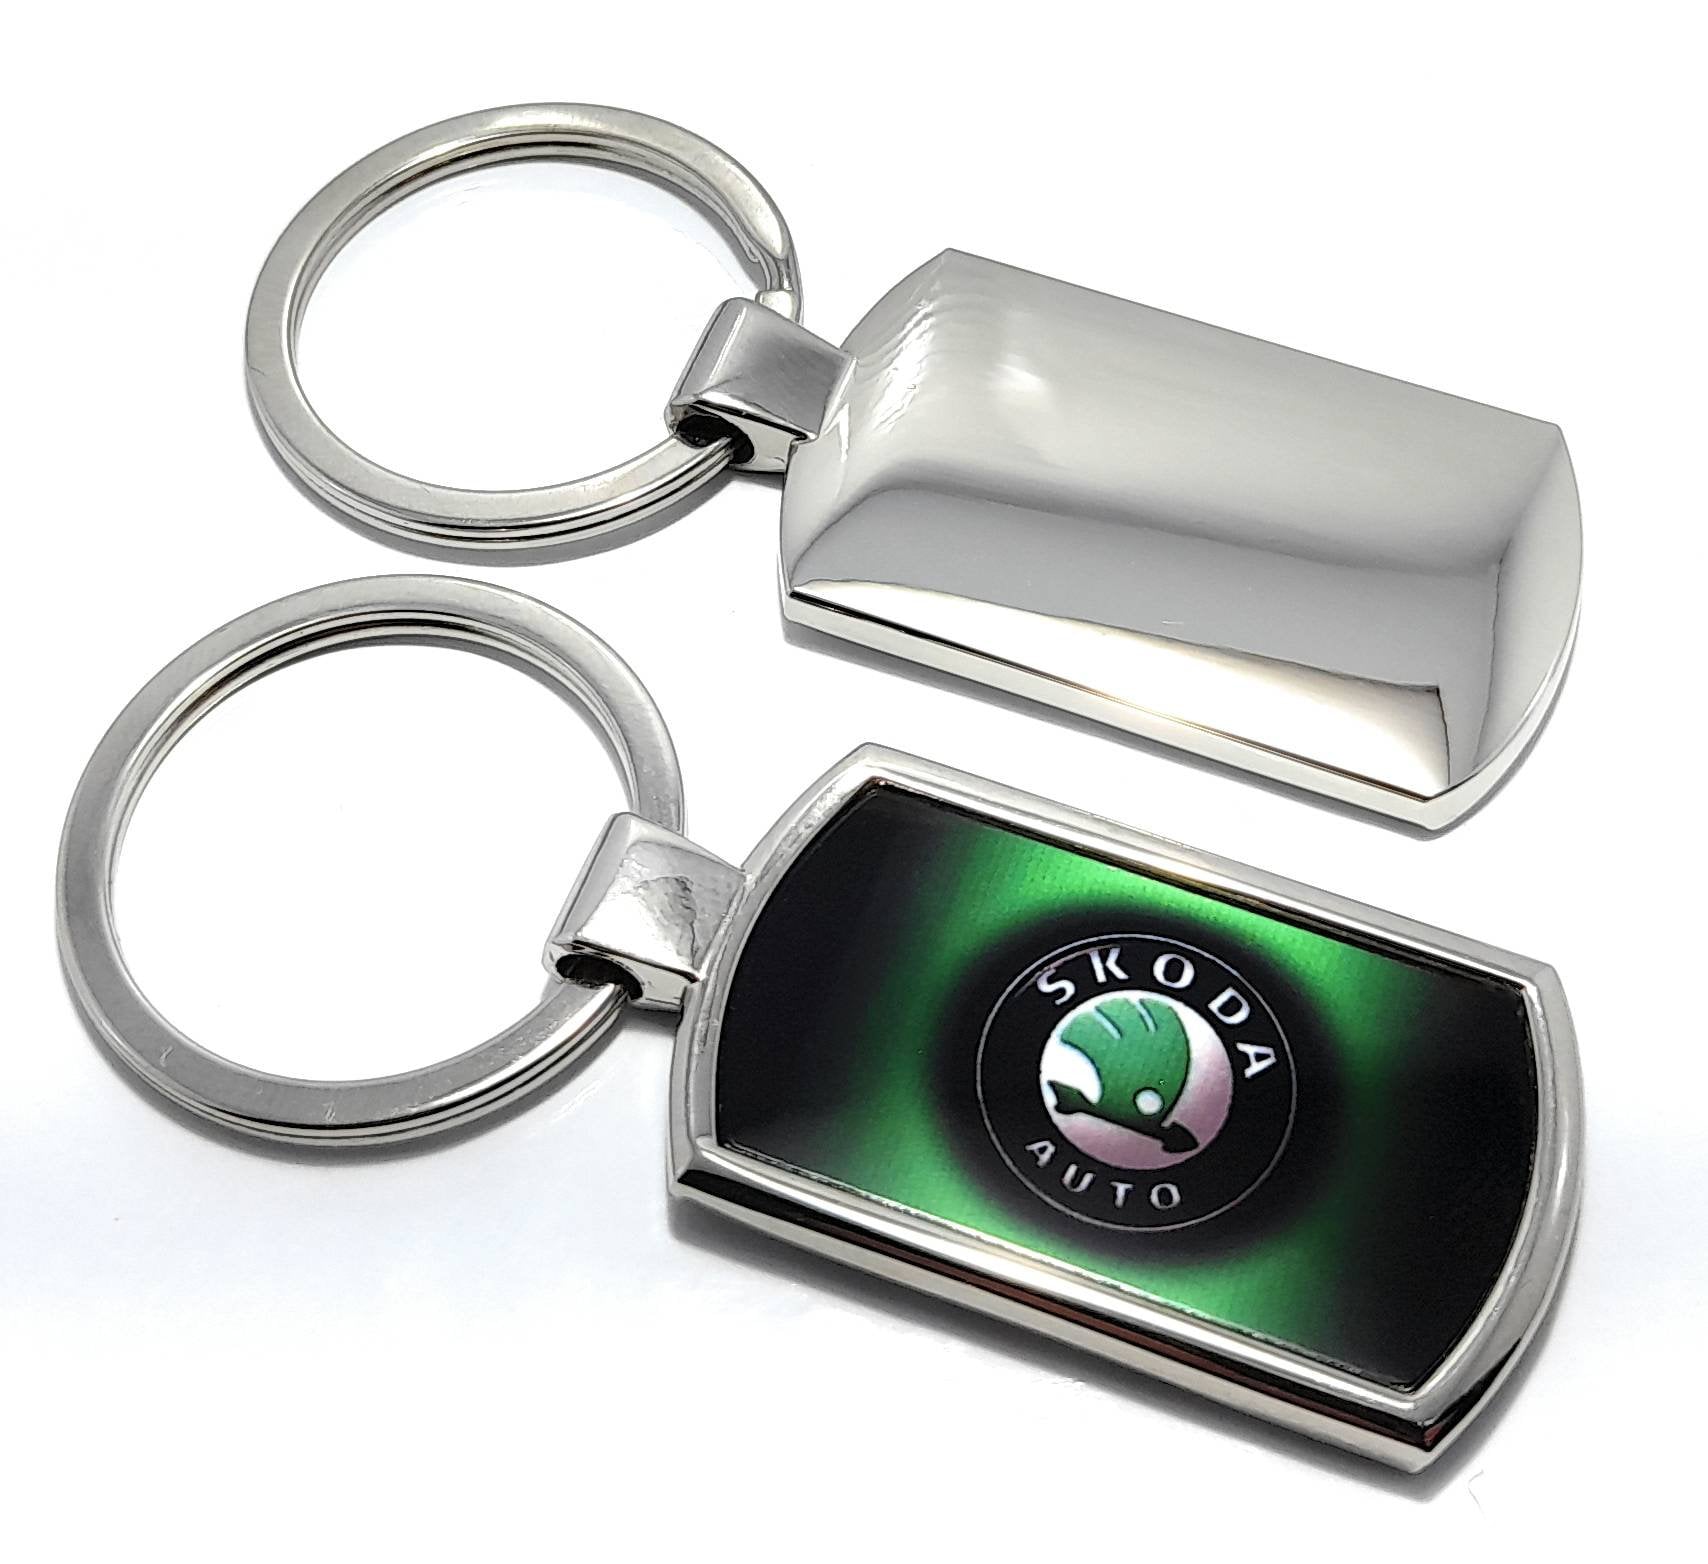 Skoda keyring Gift Birthday, Chrome metal keying With free gift box gift  for dad, brother, girlfriend, mother,friend. Car keyring